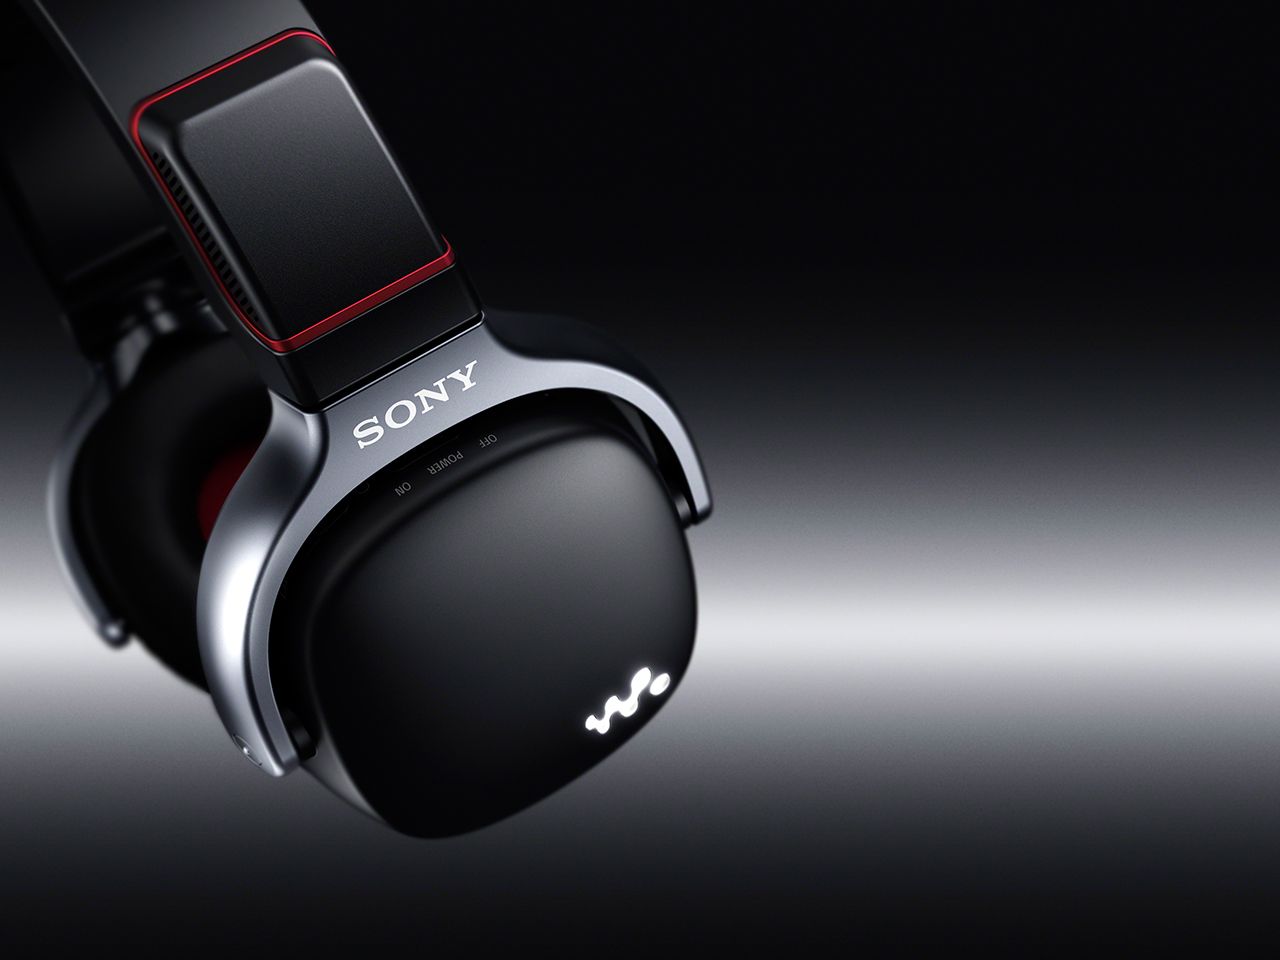 sony introduces 3 in 1 walkman wh series wireless headphones cum mp3 player that turns into loudspeakers image 1